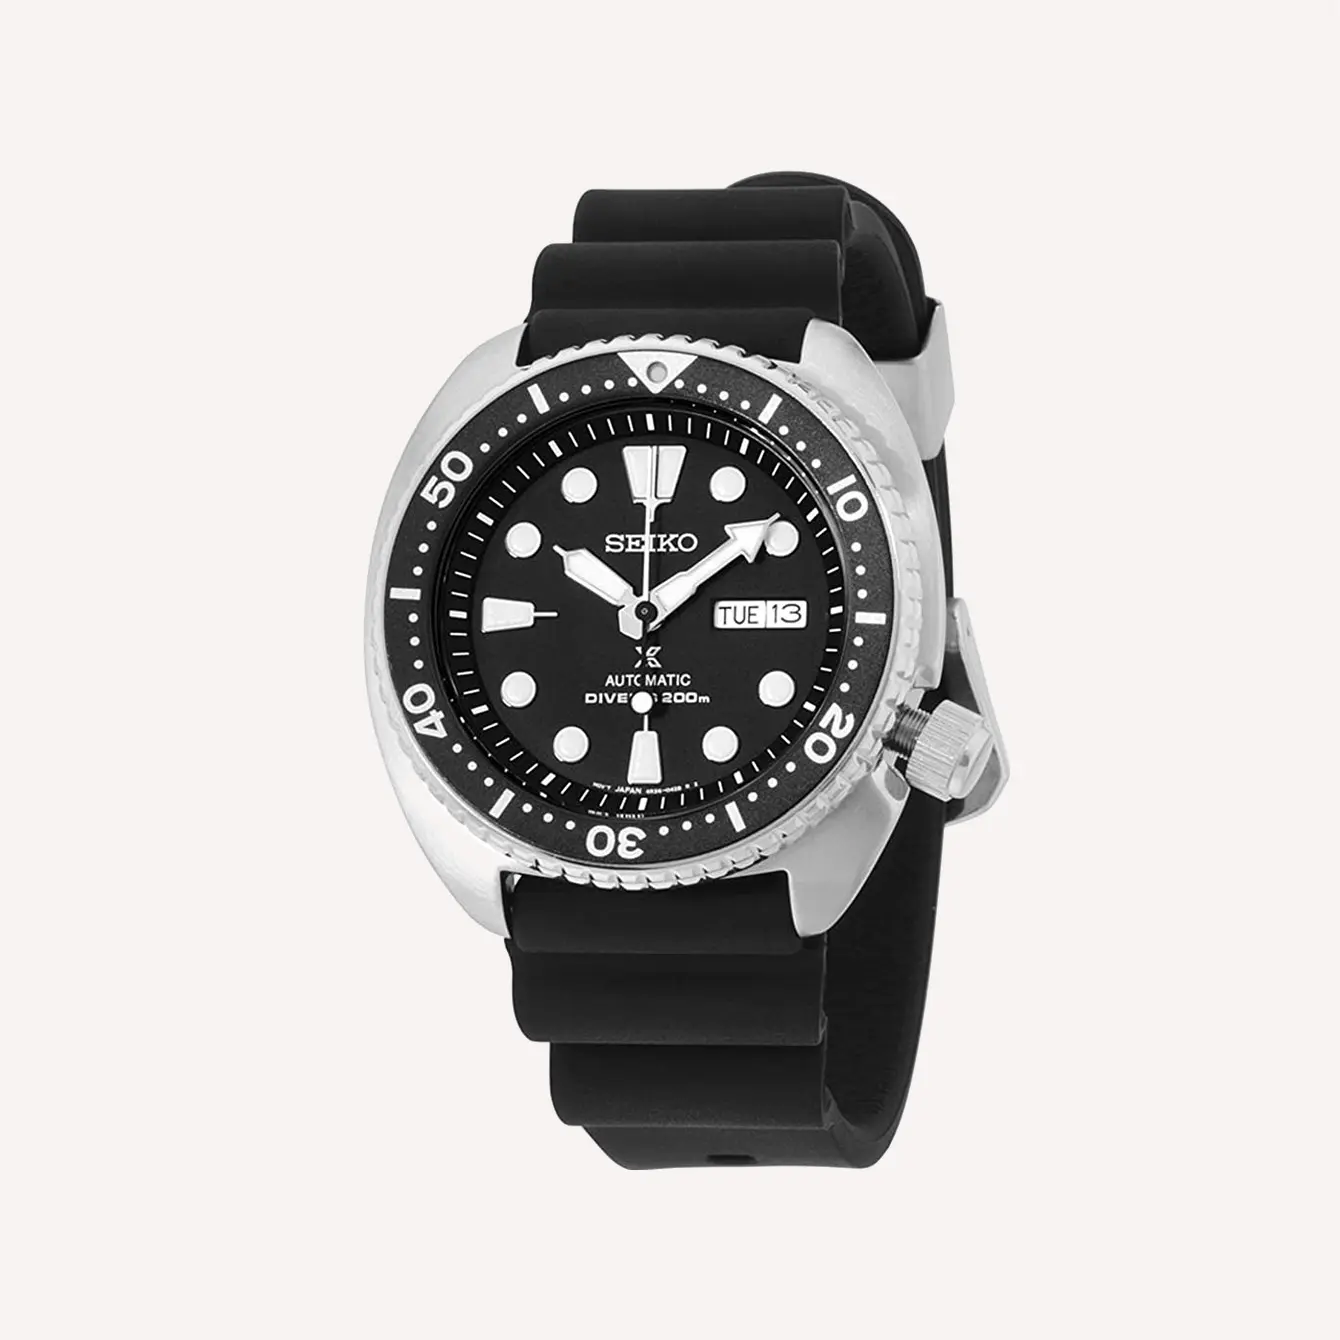 SEIKO SRP777 PROSPEX AUTOMATIC DIVERS WATCH